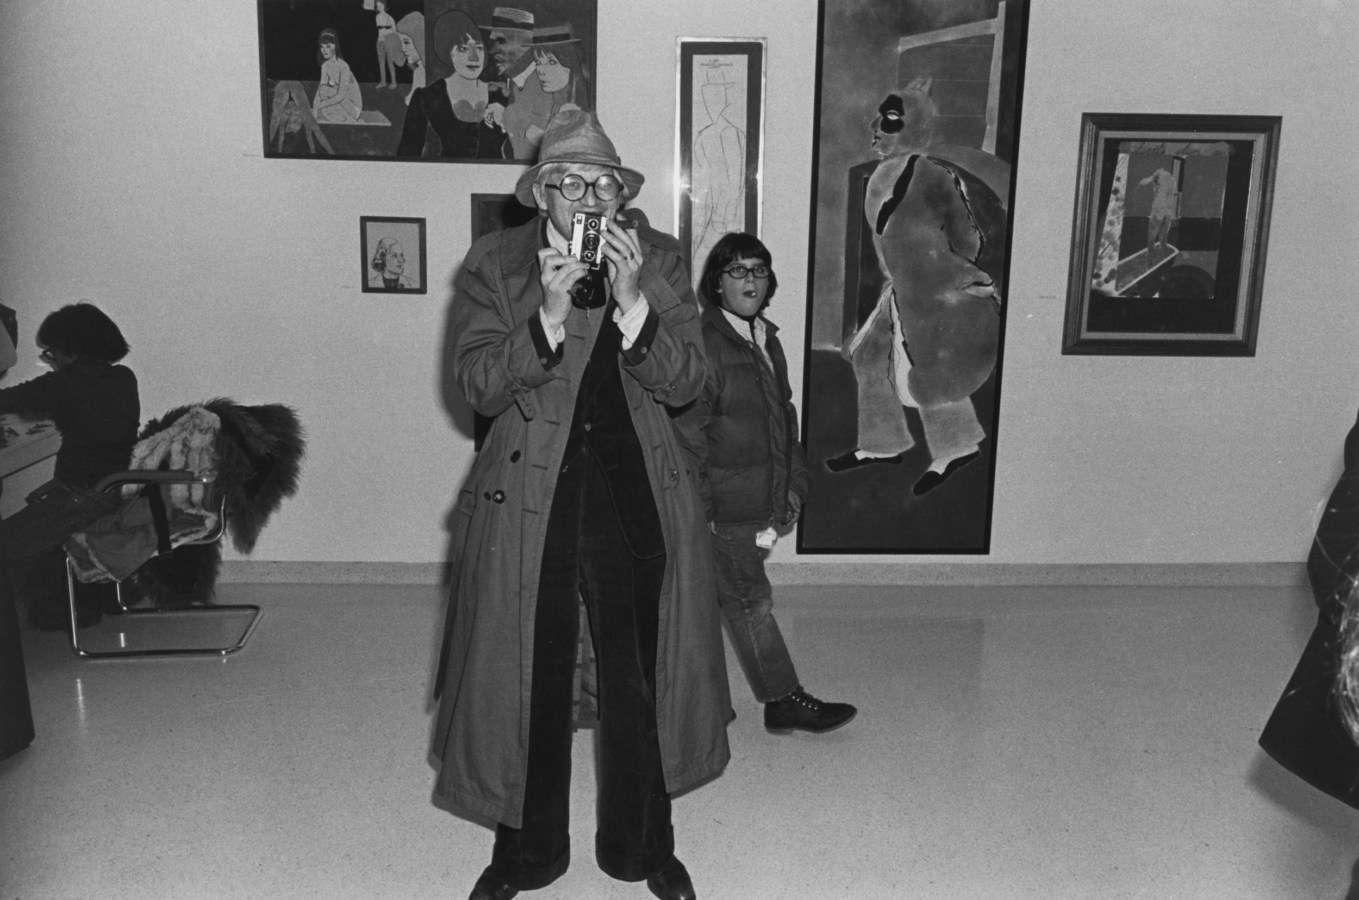 Black and white photograph of a man holding a camera in an art gallery